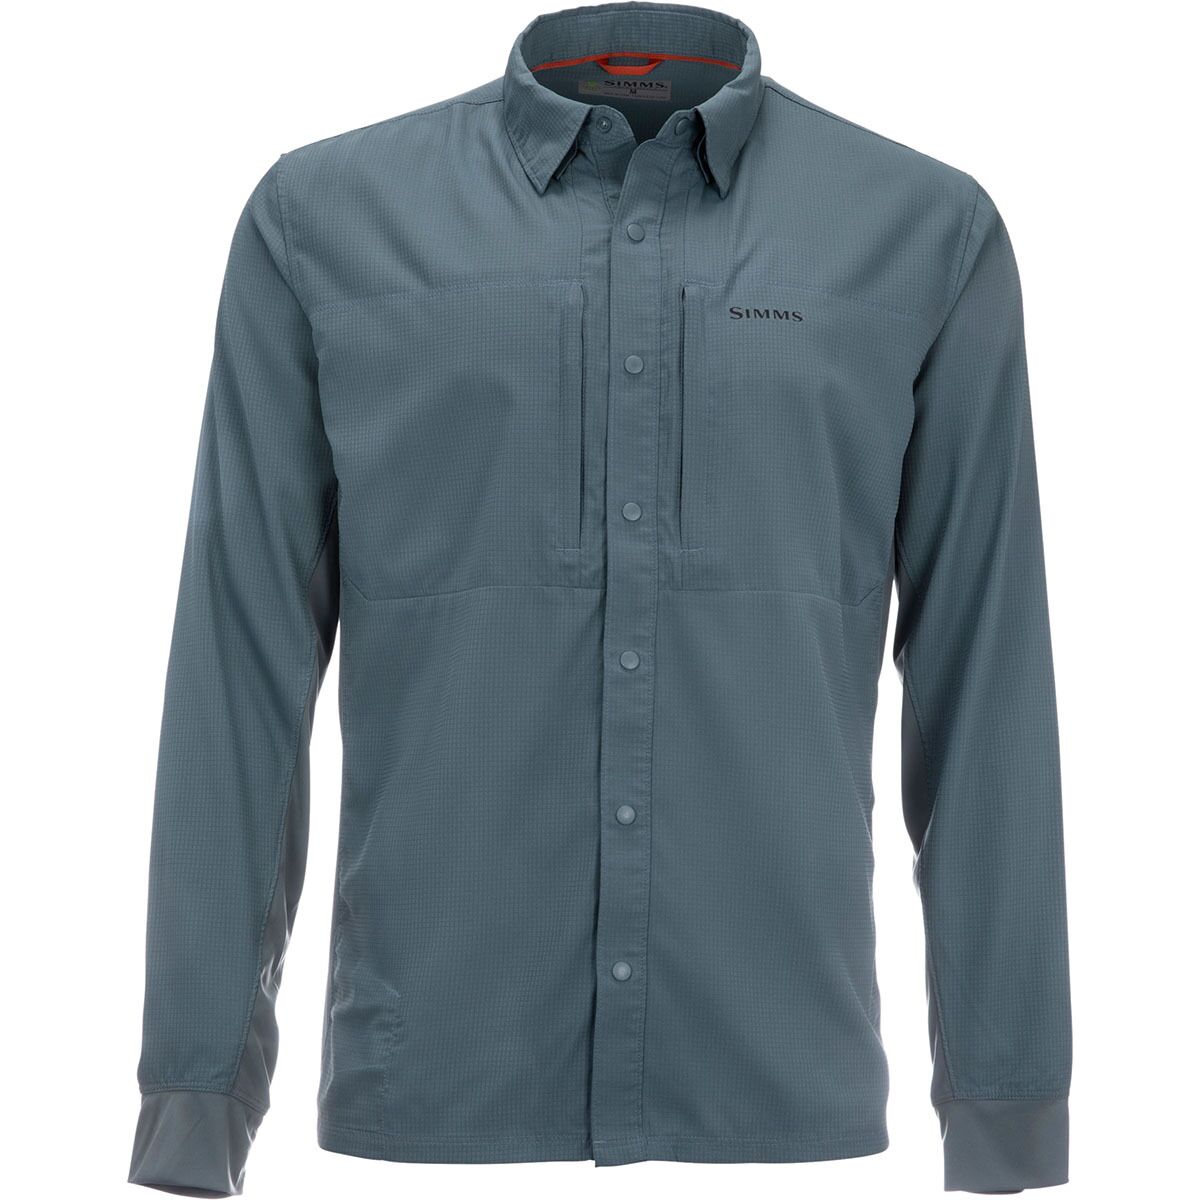  Simms Men's Intruder BiComp Long Sleeve Shirt, UPF 30, Quick  Dry, Cinder, Small : Clothing, Shoes & Jewelry